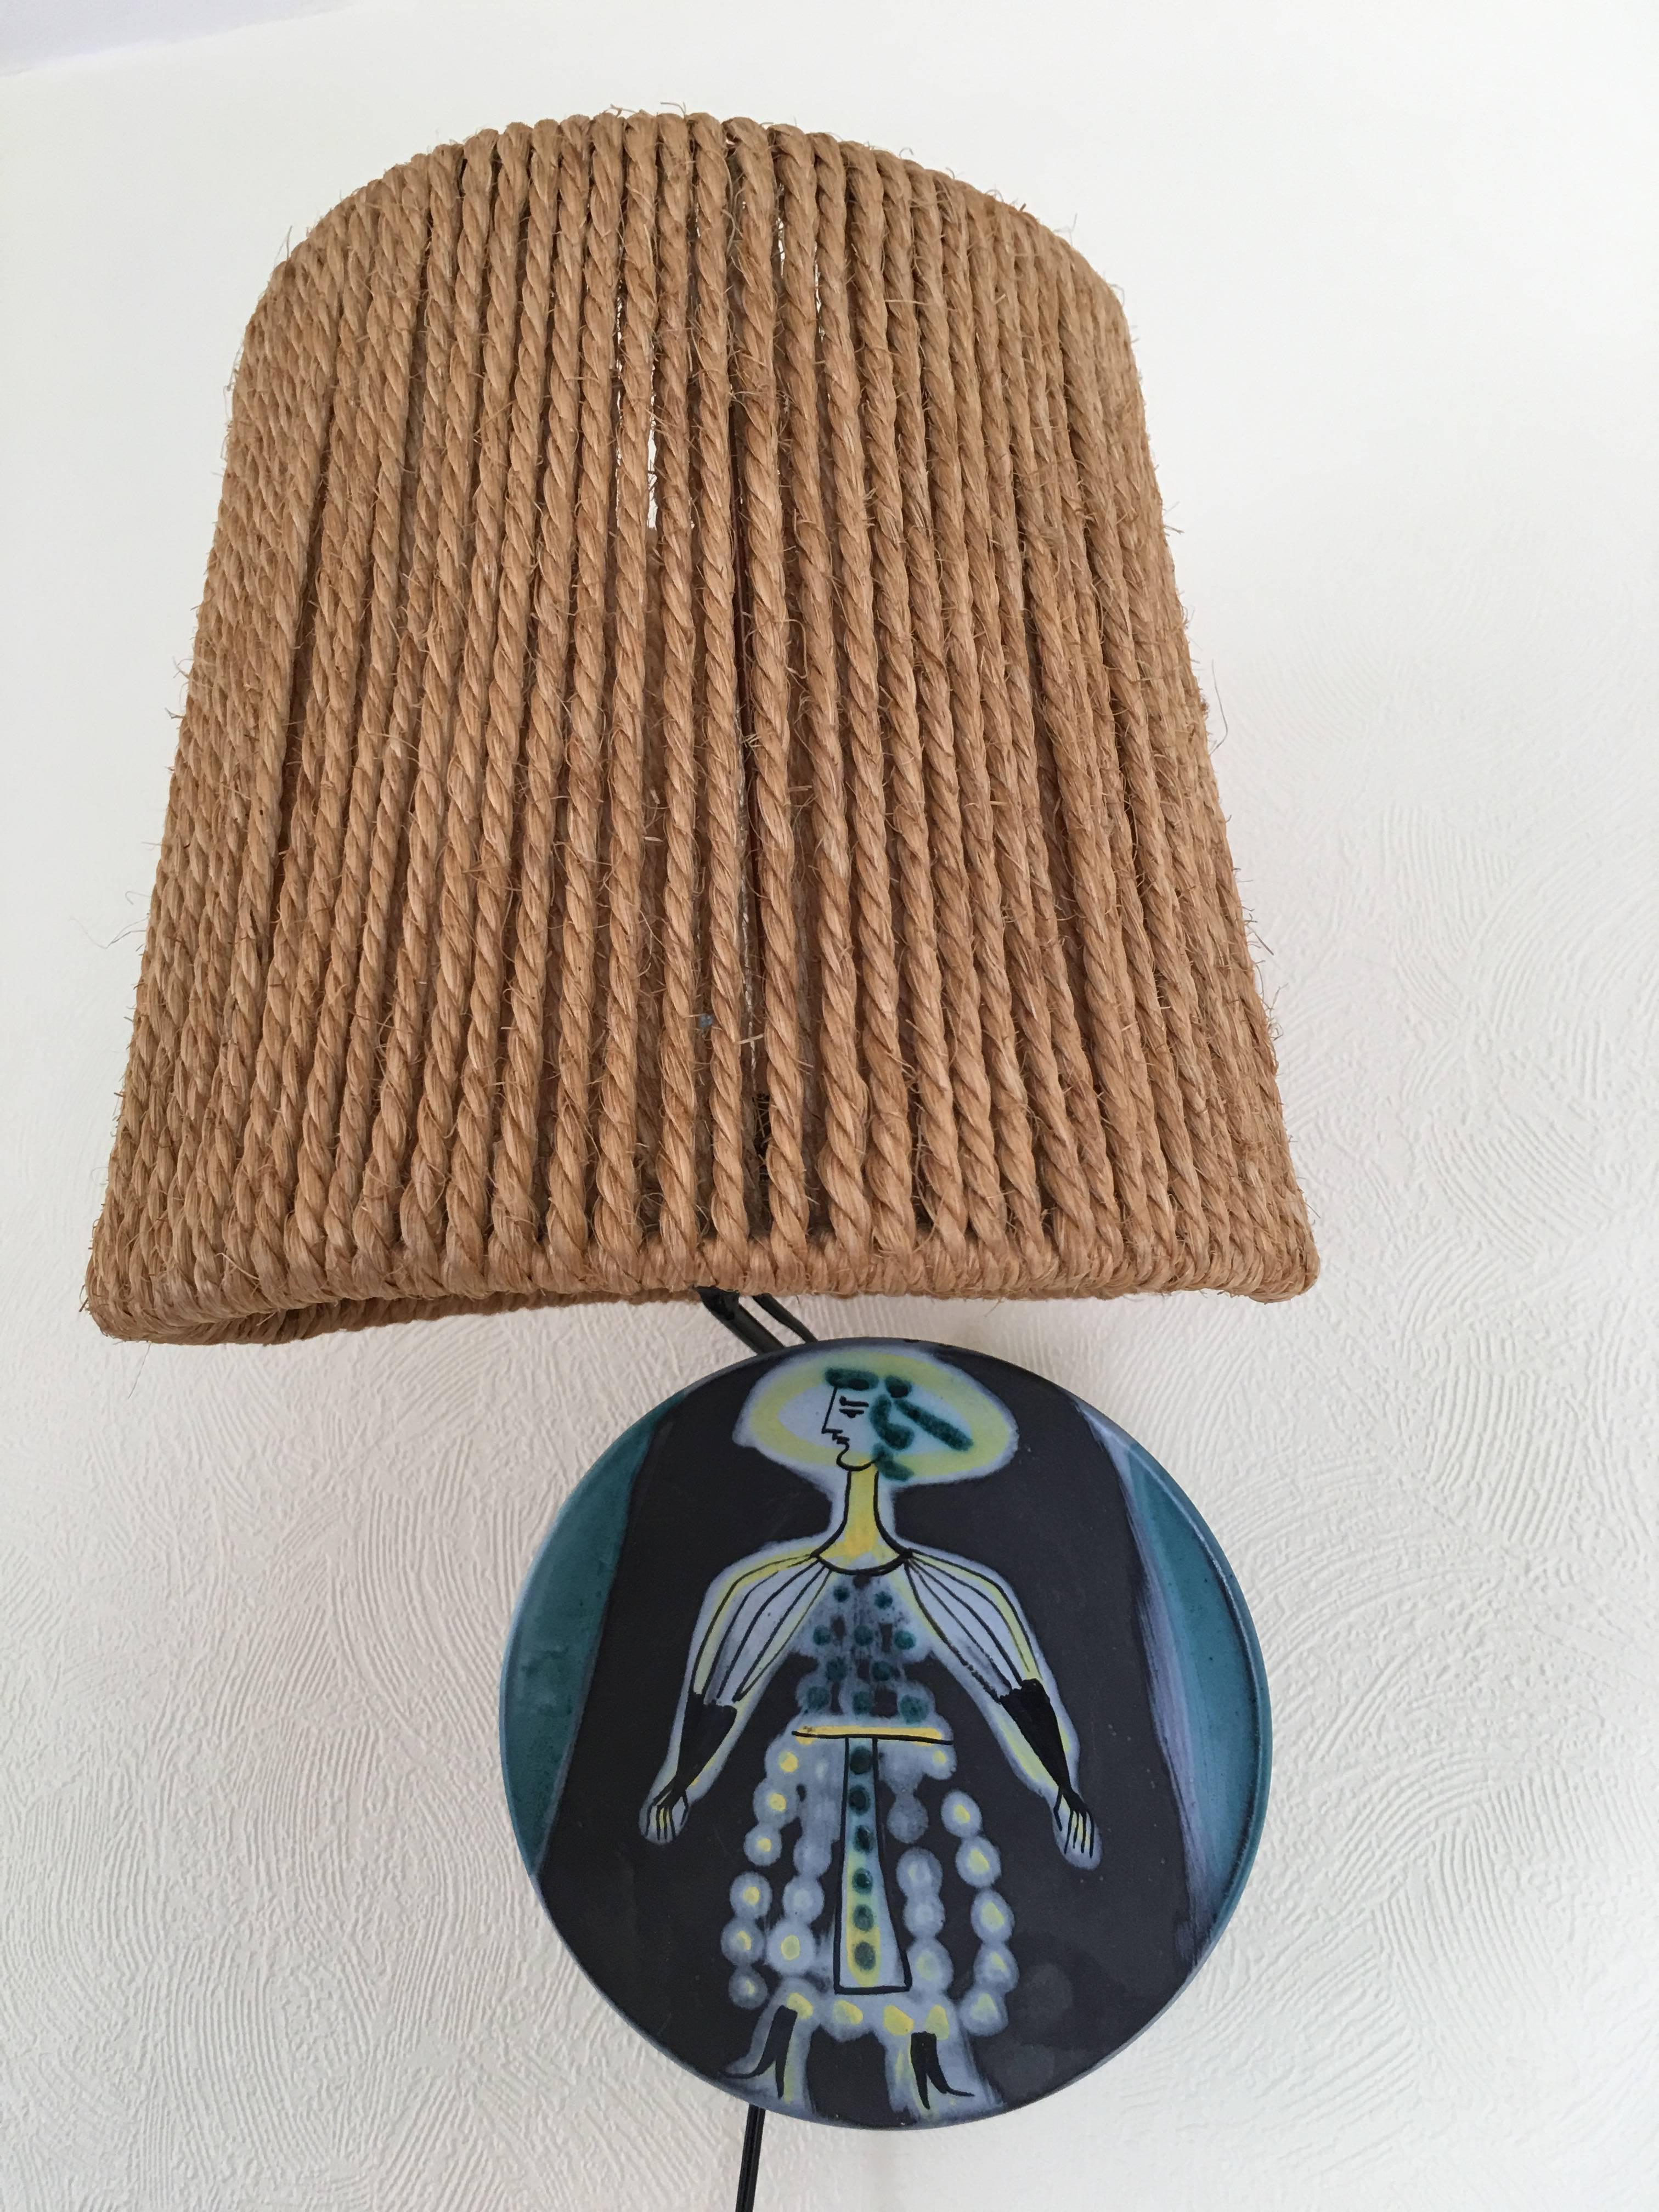 Mid-Century Modern Capron Signed Ceramic Plate Sconce, Audoux-Minet Rope Shade, Vallauris France